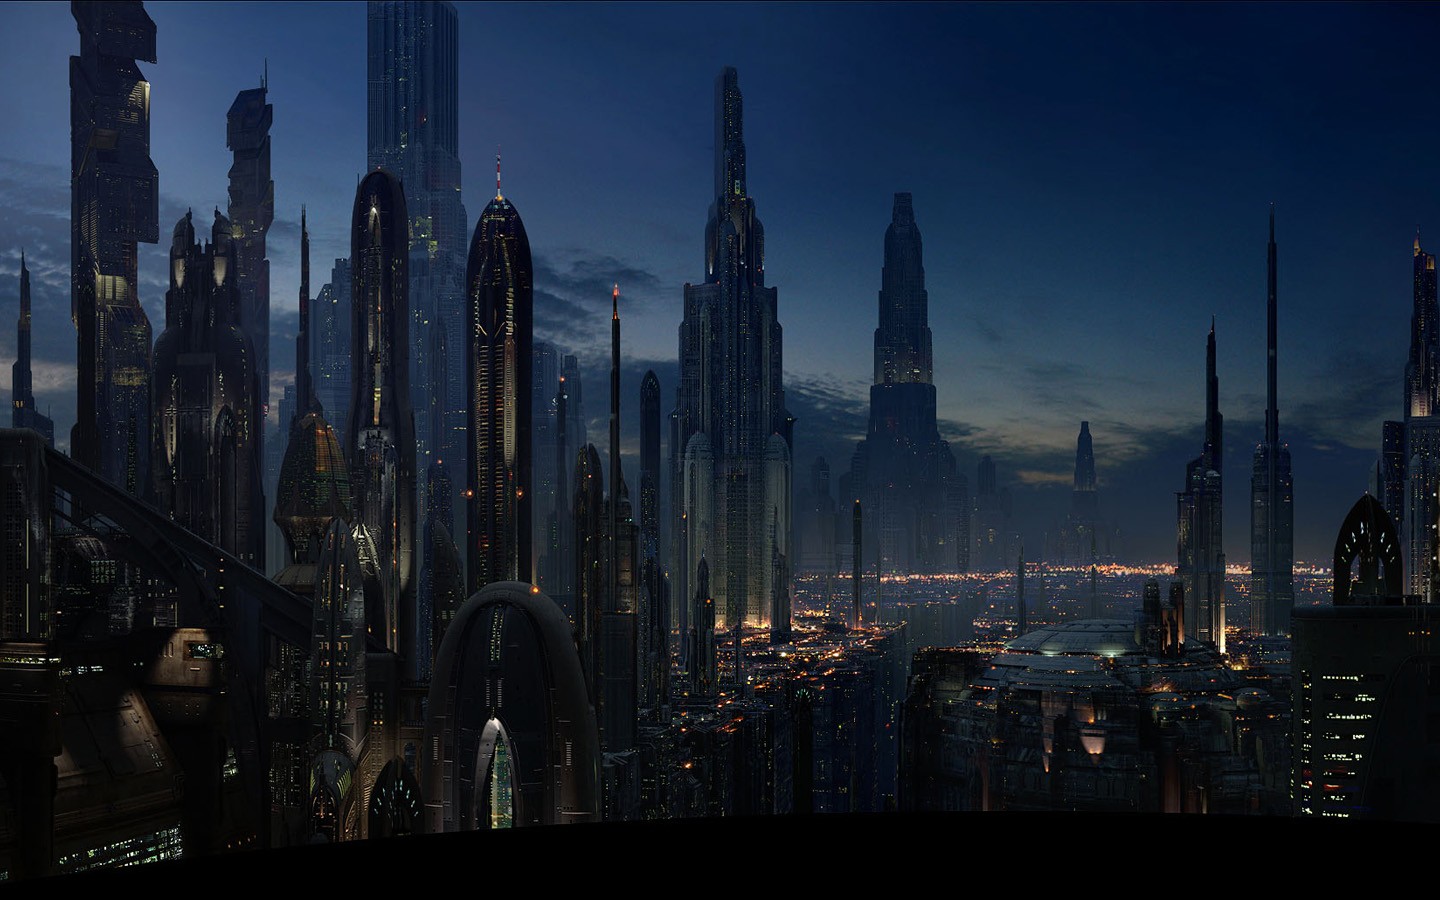 General 1440x900 Star Wars Coruscant Star Wars: Episode III - The Revenge of the Sith movies futuristic city night sky science fiction 2005 (Year) film stills cityscape